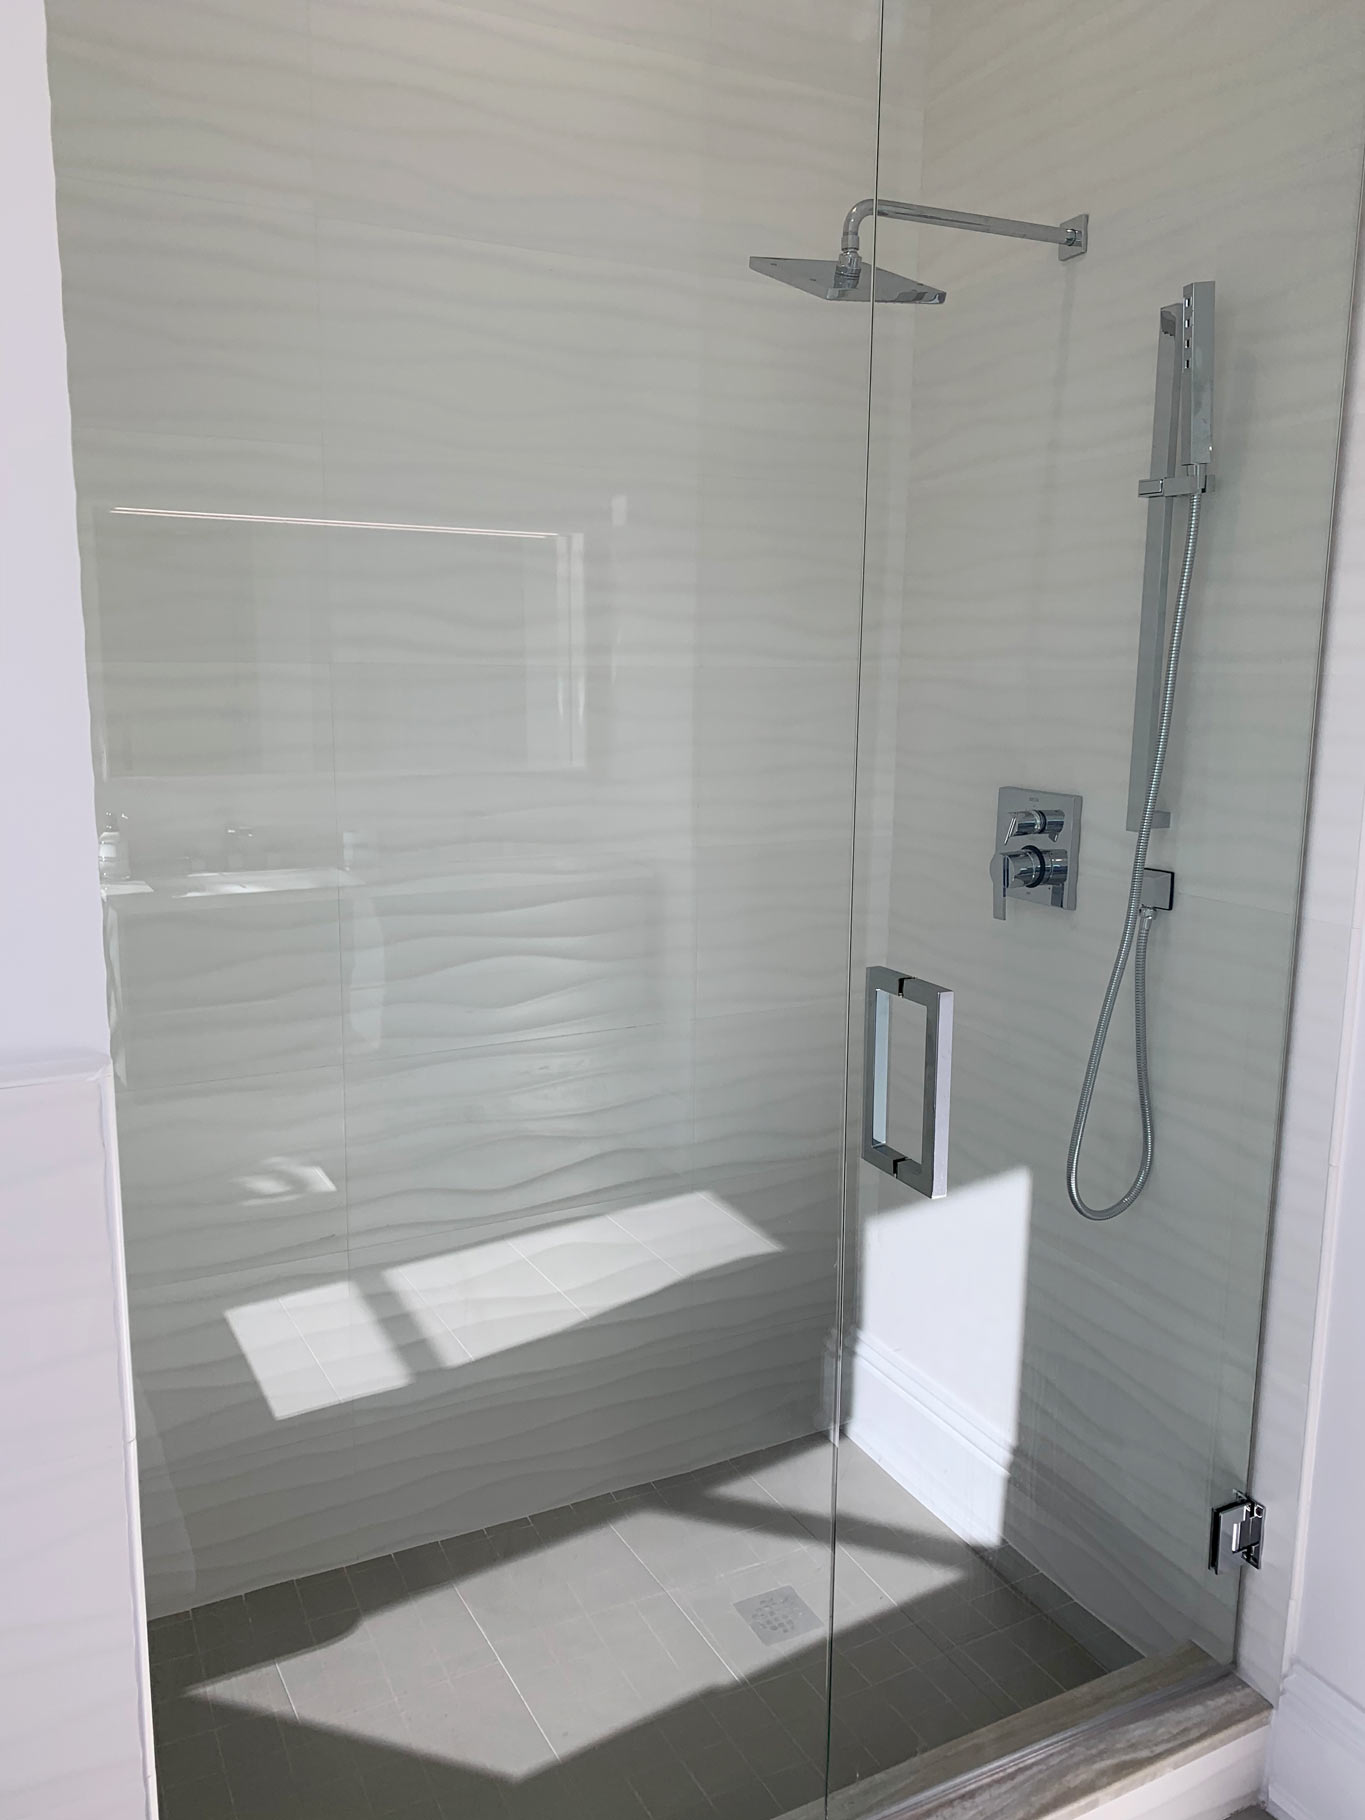 New glass shower enclosure with white stone wavy tile pattern